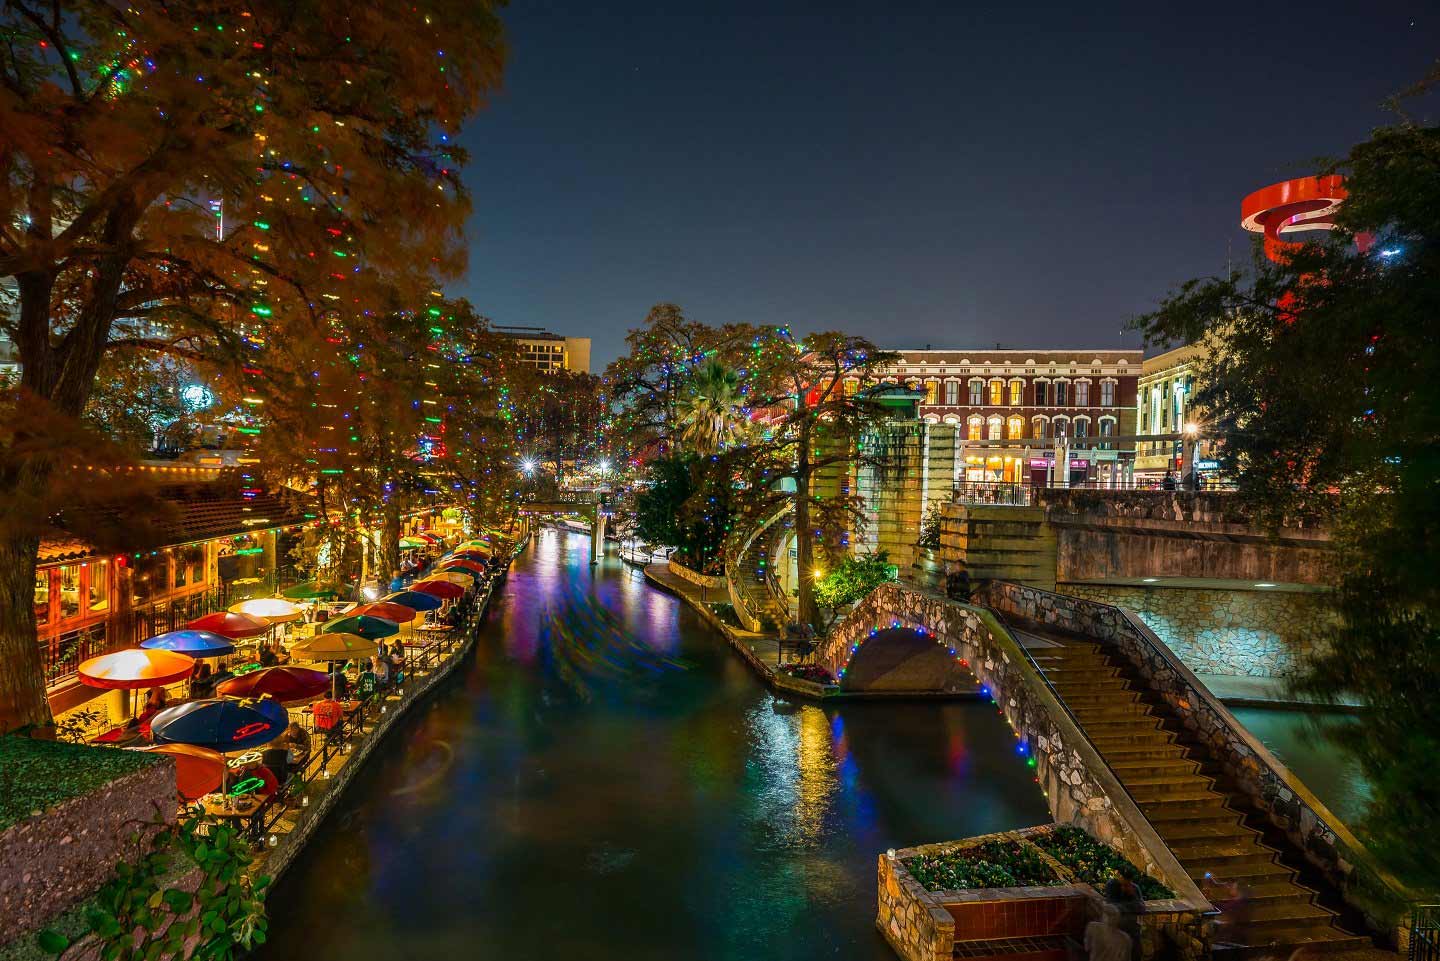 San Antonio River Walk's famed holiday lights display extended through